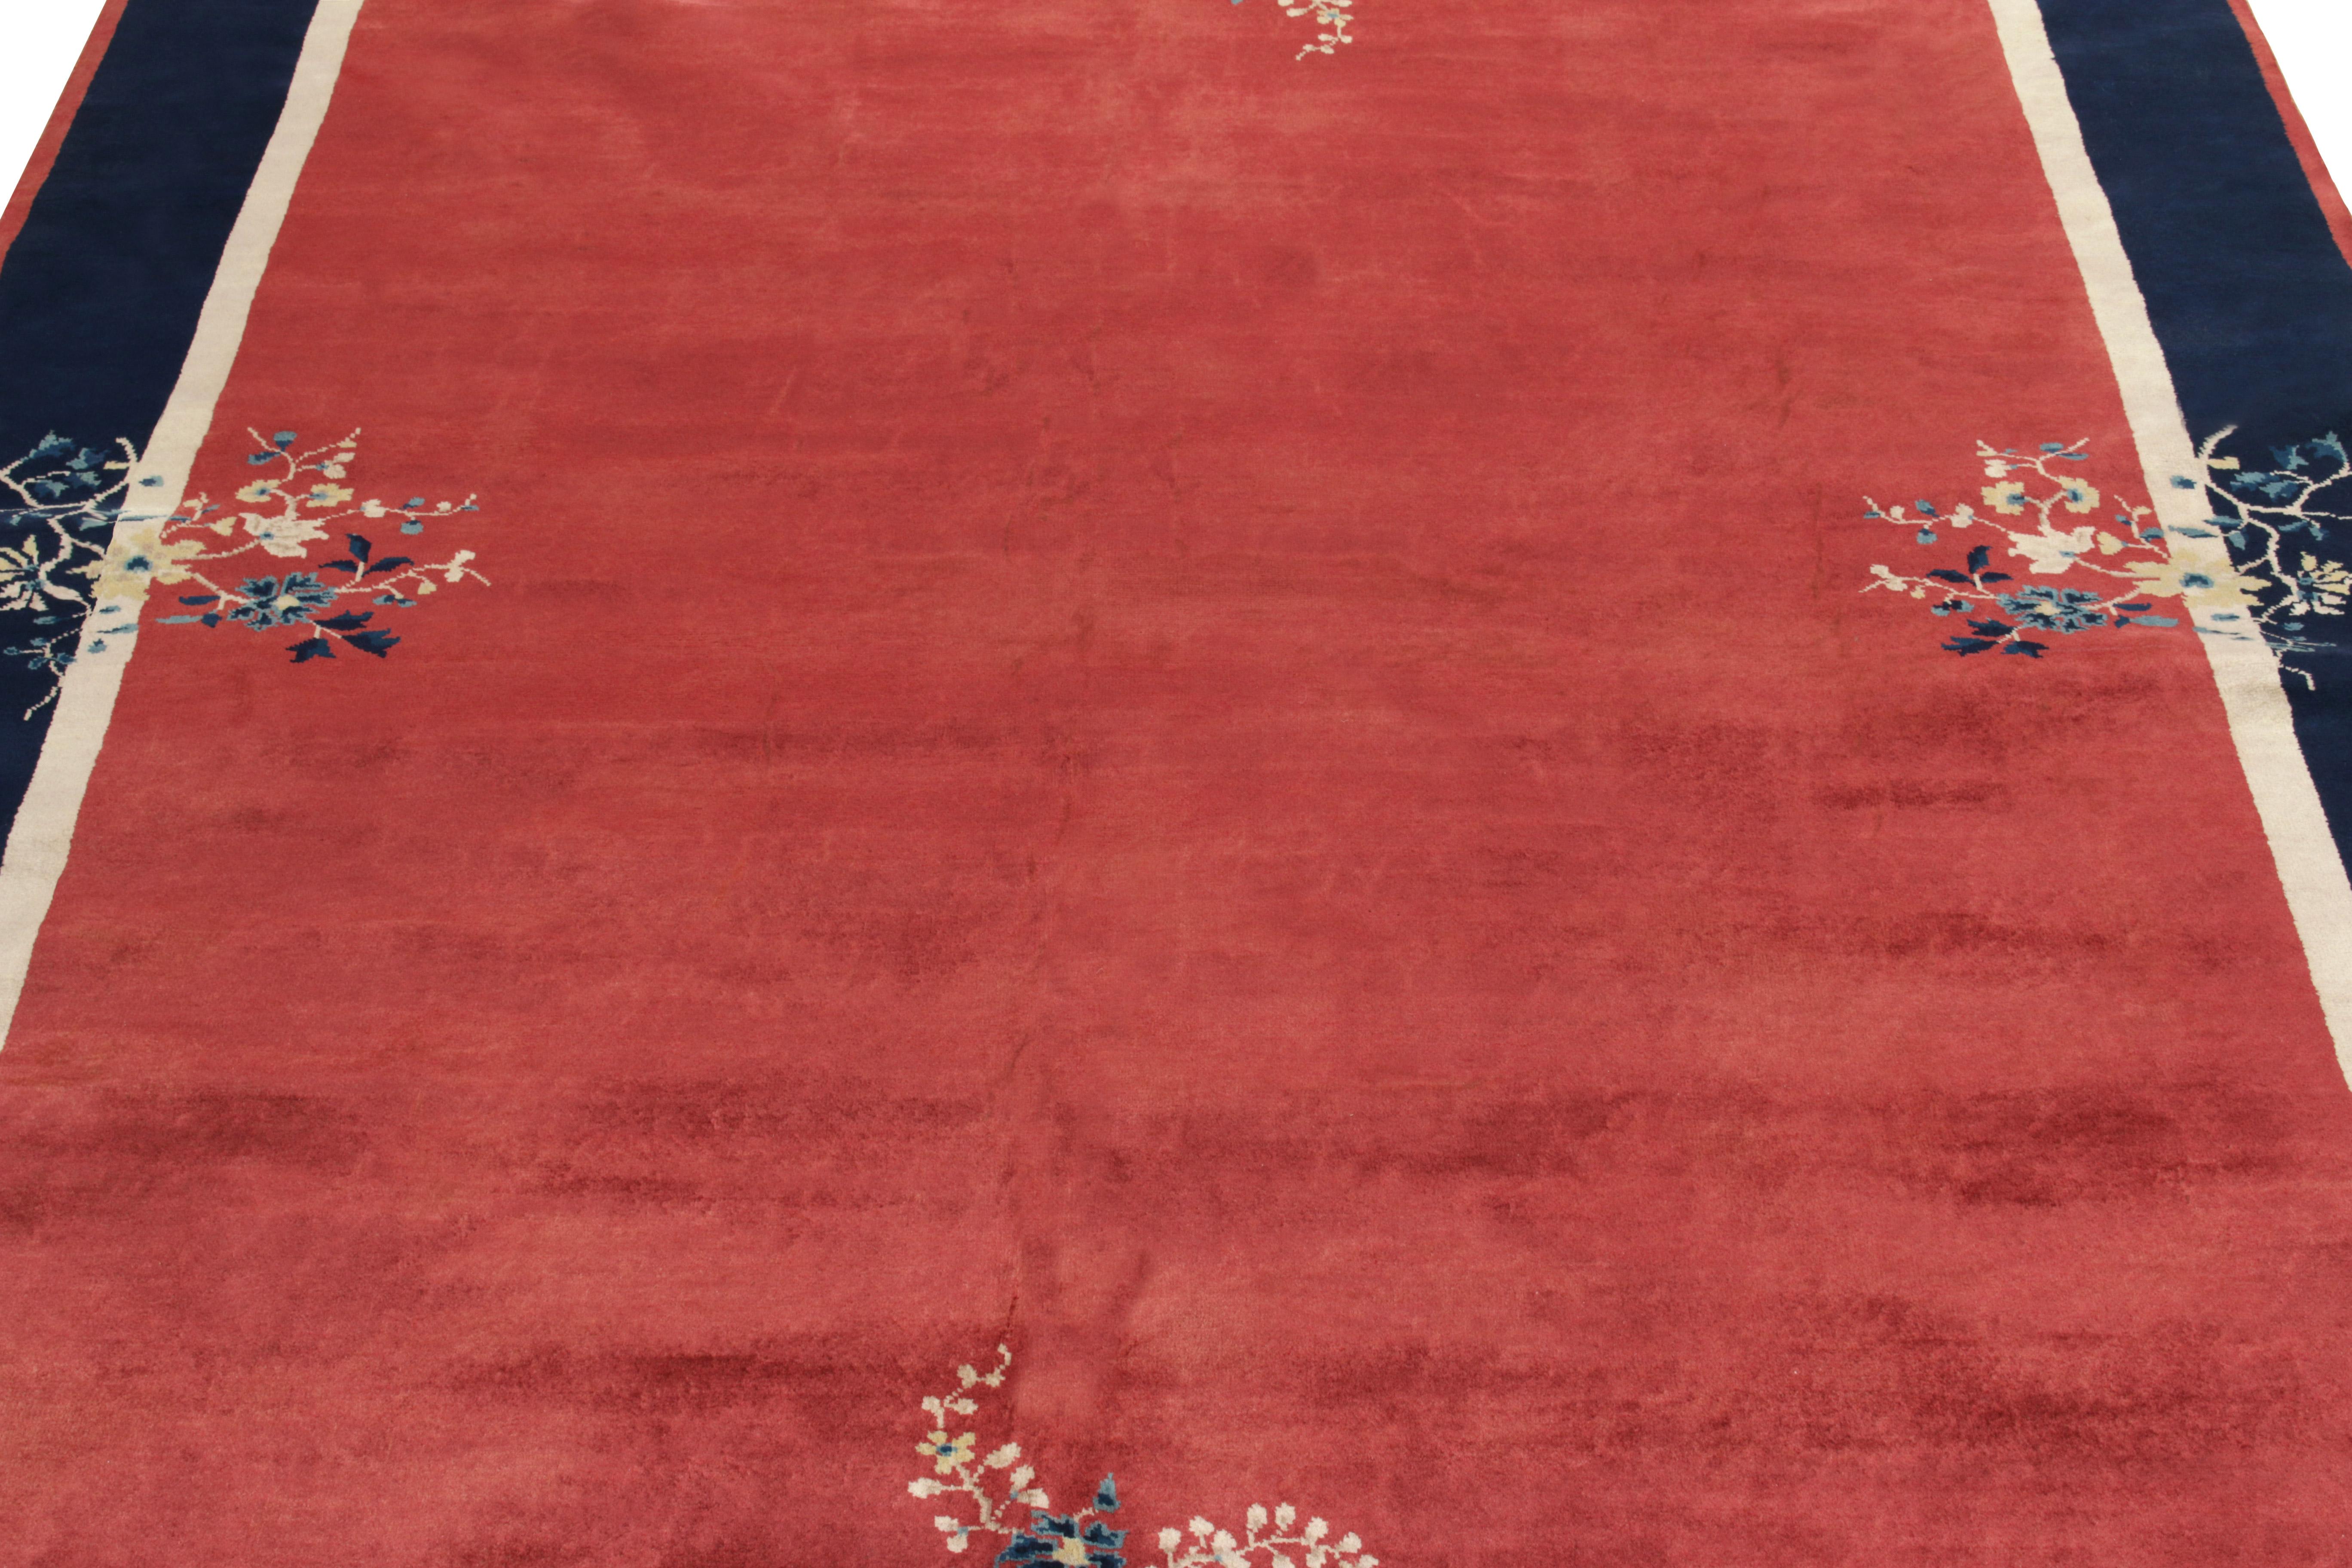 Art Deco Vintage Chinese Deco Style Rug in Red, Blue, White Floral Pattern by Rug & Kilim